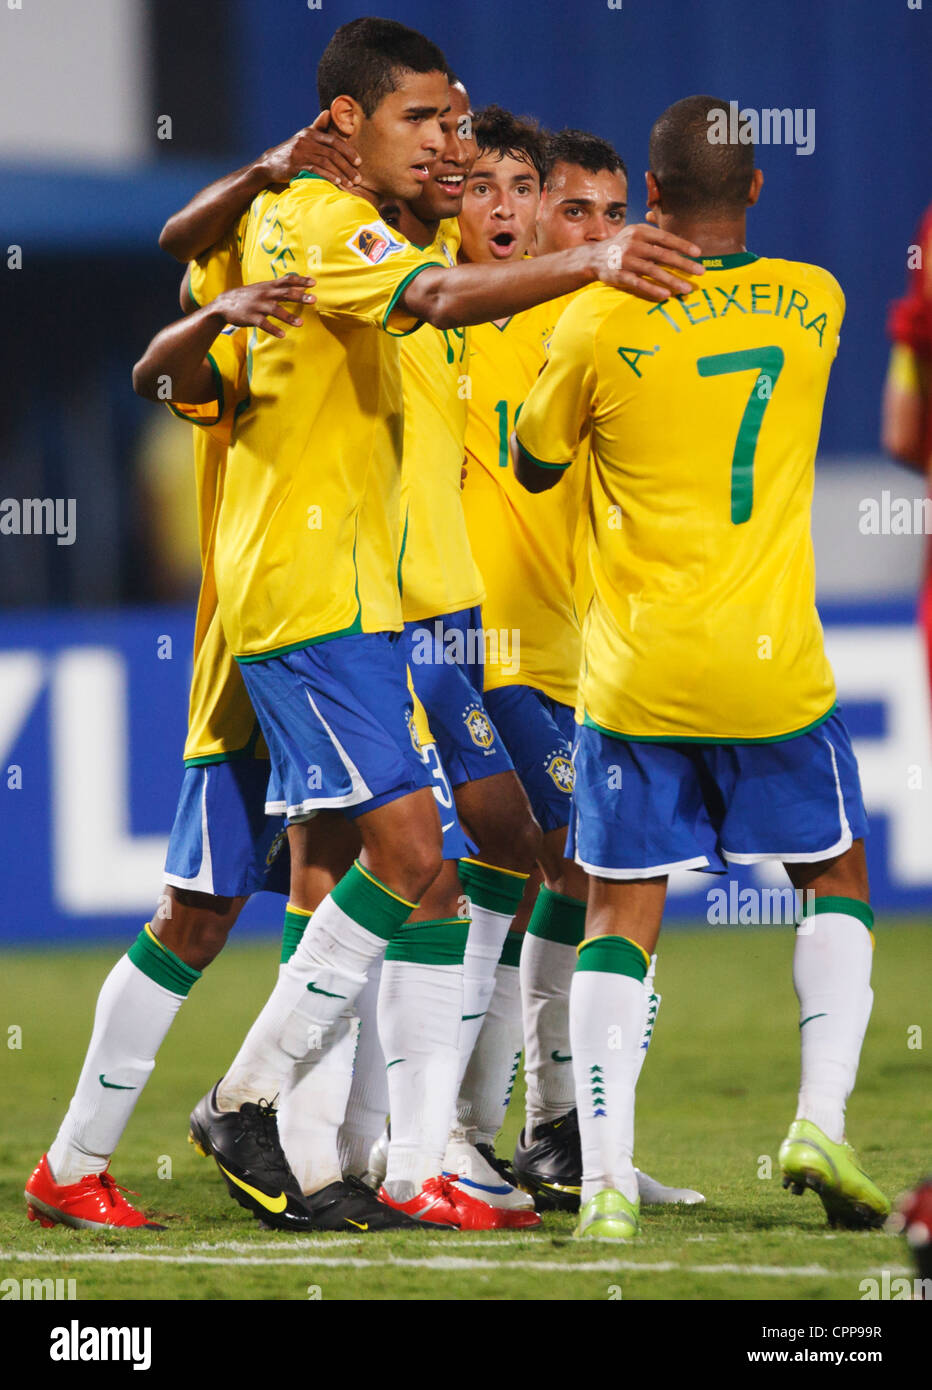 Brazil team players celebrate a goal against Germany in a FIFA U-20 World Cup quarterfinal match at Cairo International Stadium. Stock Photo